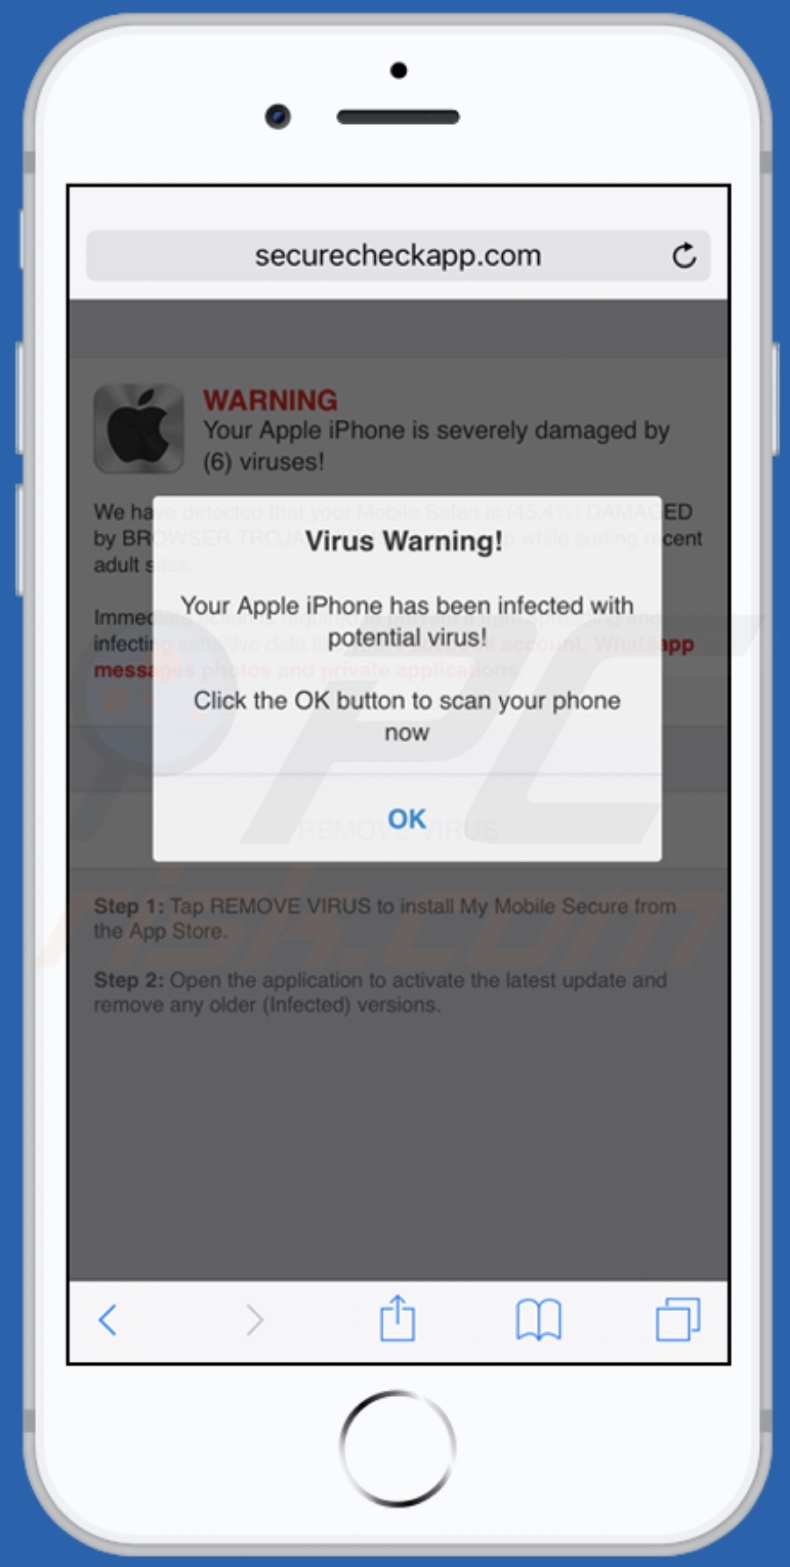  Variant of the Your Apple iPhone is severely damaged scam promoted on securecheckapp[.]com